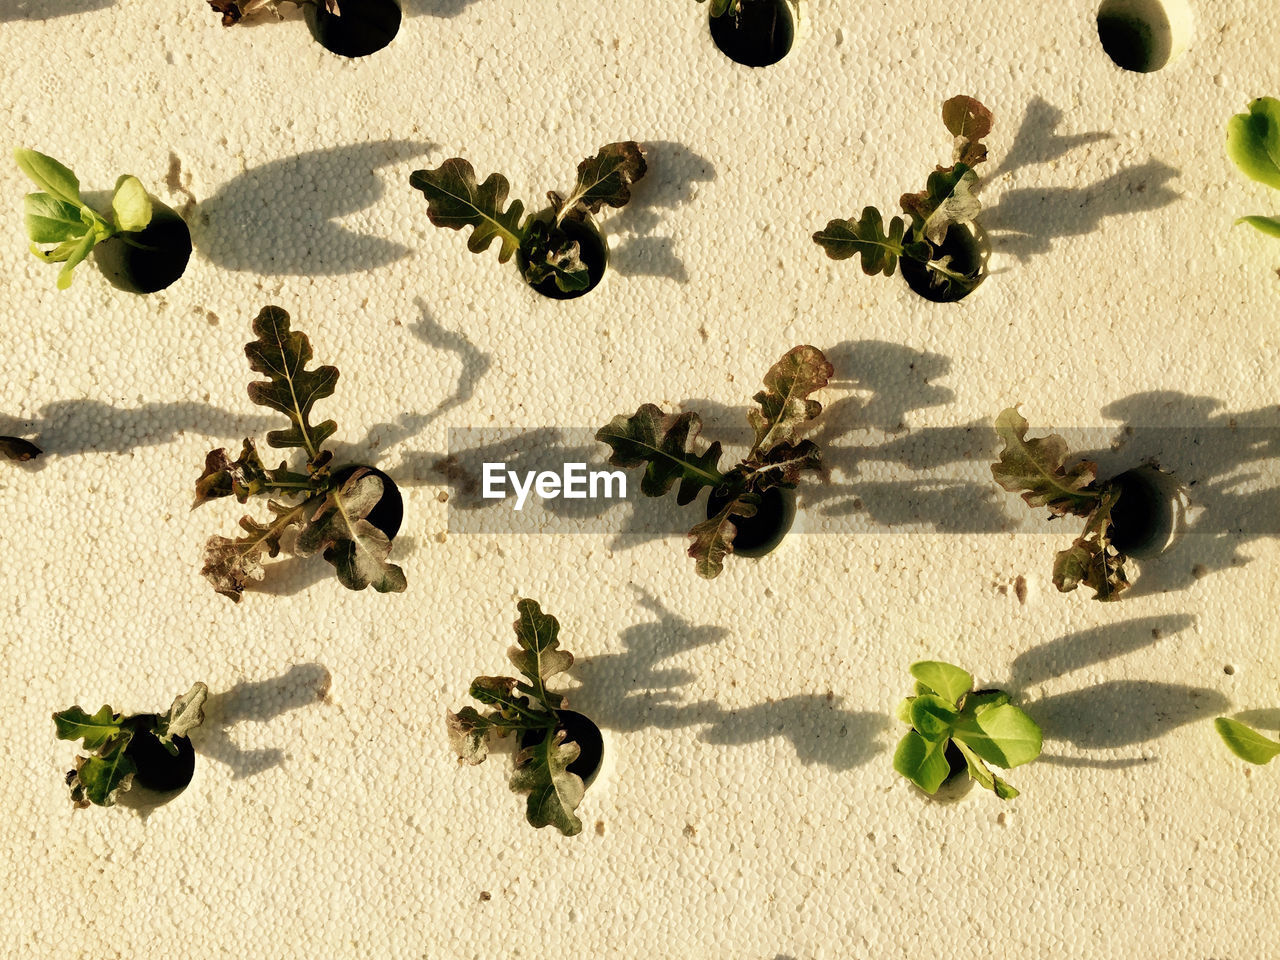 High angle view of plants on sand at beach